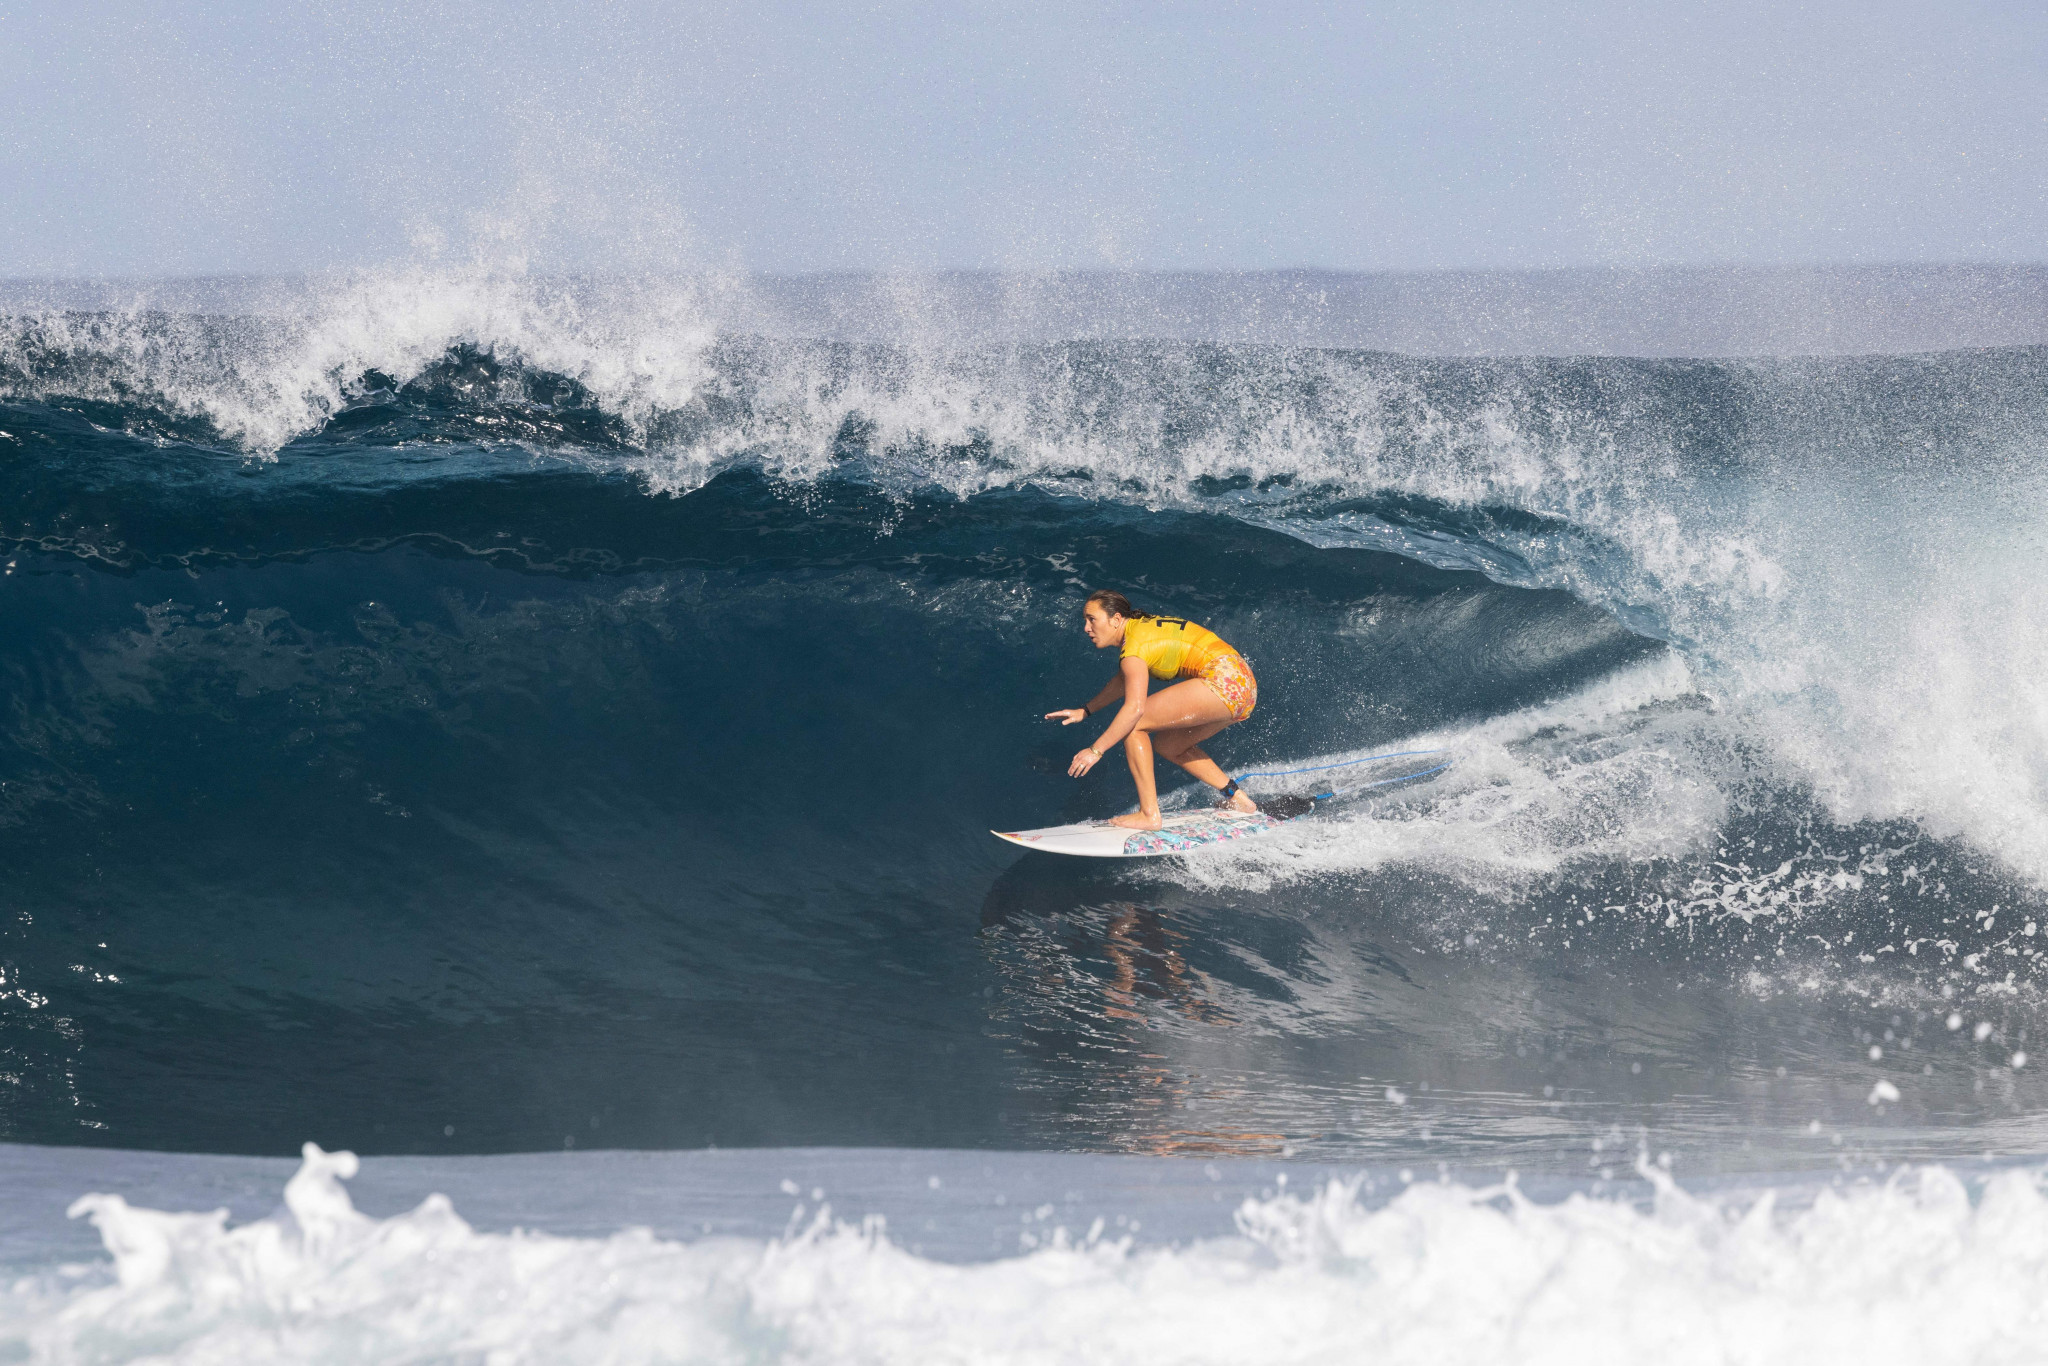 Moore and Wright through to semi-finals in World Surf League contest at Pipeline